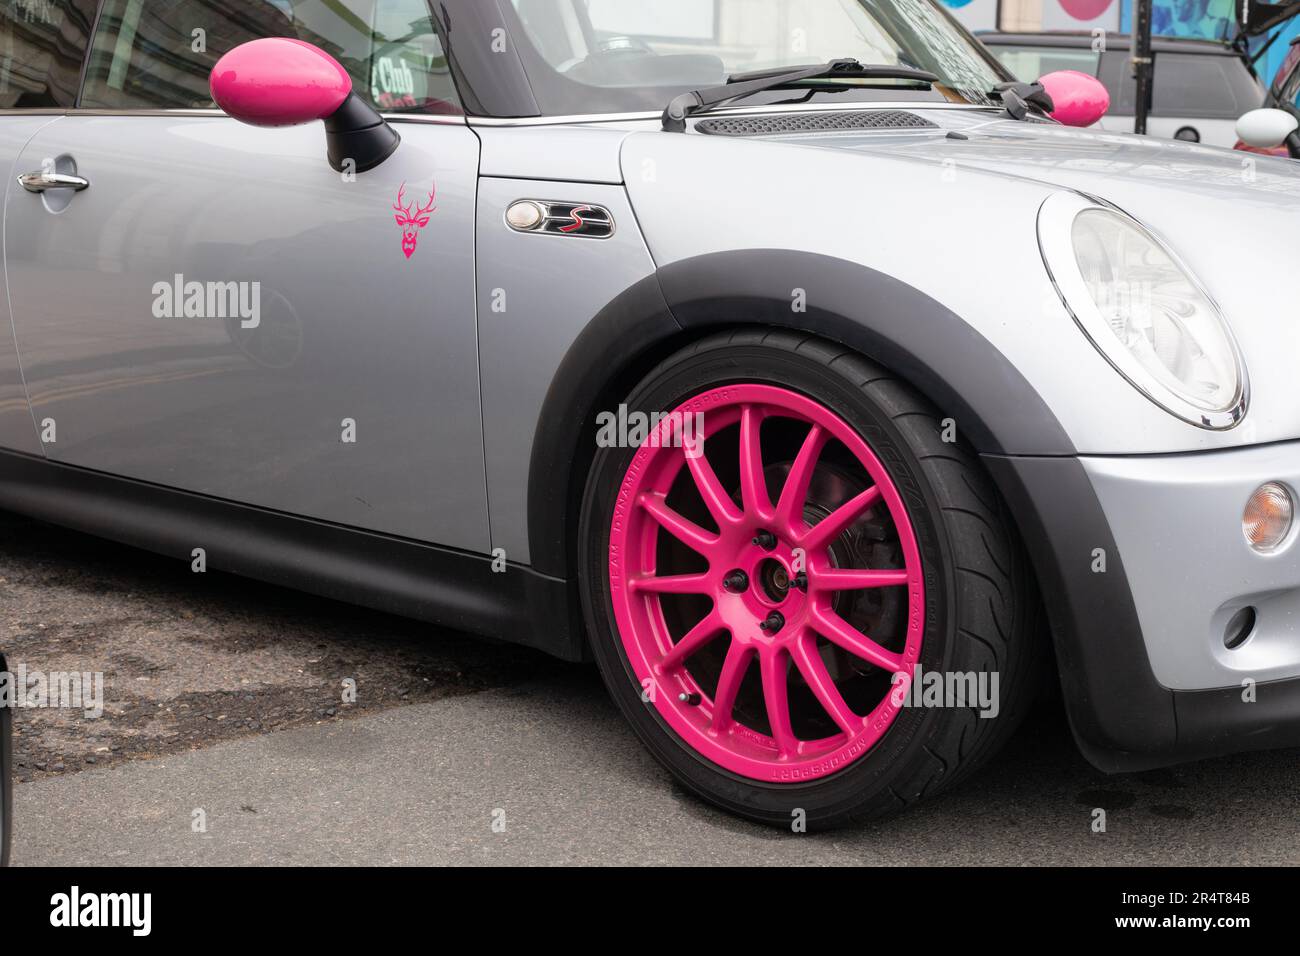 Brighton, UK - May 19 2019:  A detail view of a silver and bright pink Mini car taking part in the London Brighton Mini Run 2019. Stock Photo